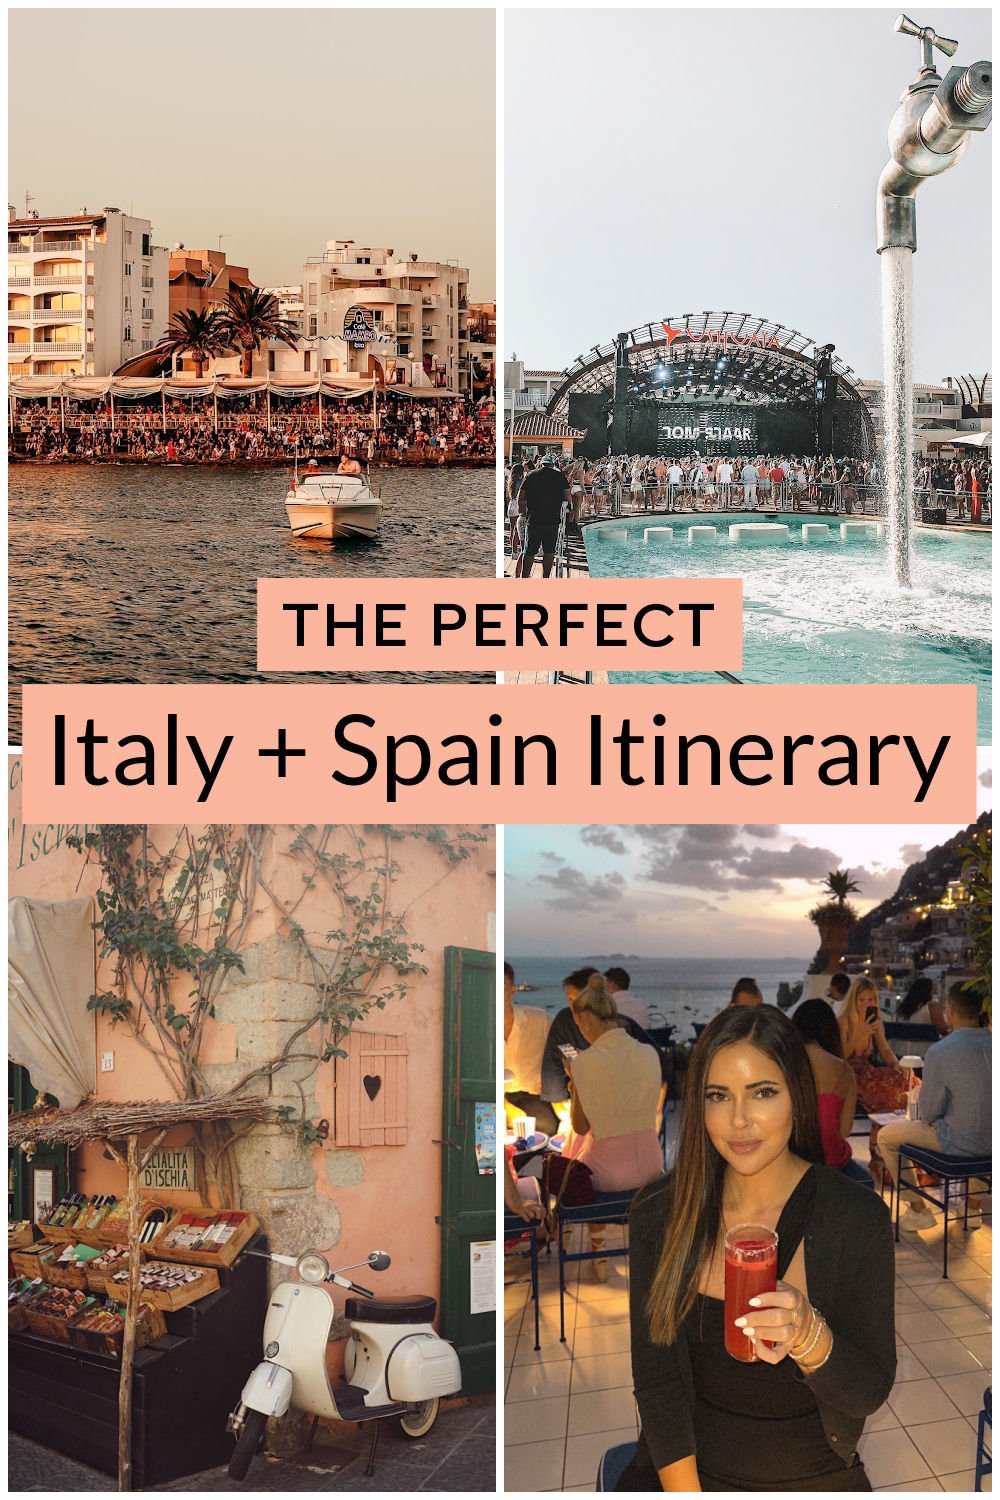 The best Europe itinerary 3 weeks, including the best spots in Italy and Spain. Europe travel destinations, Europe vacation, Italy travel tips, Spain travel guide